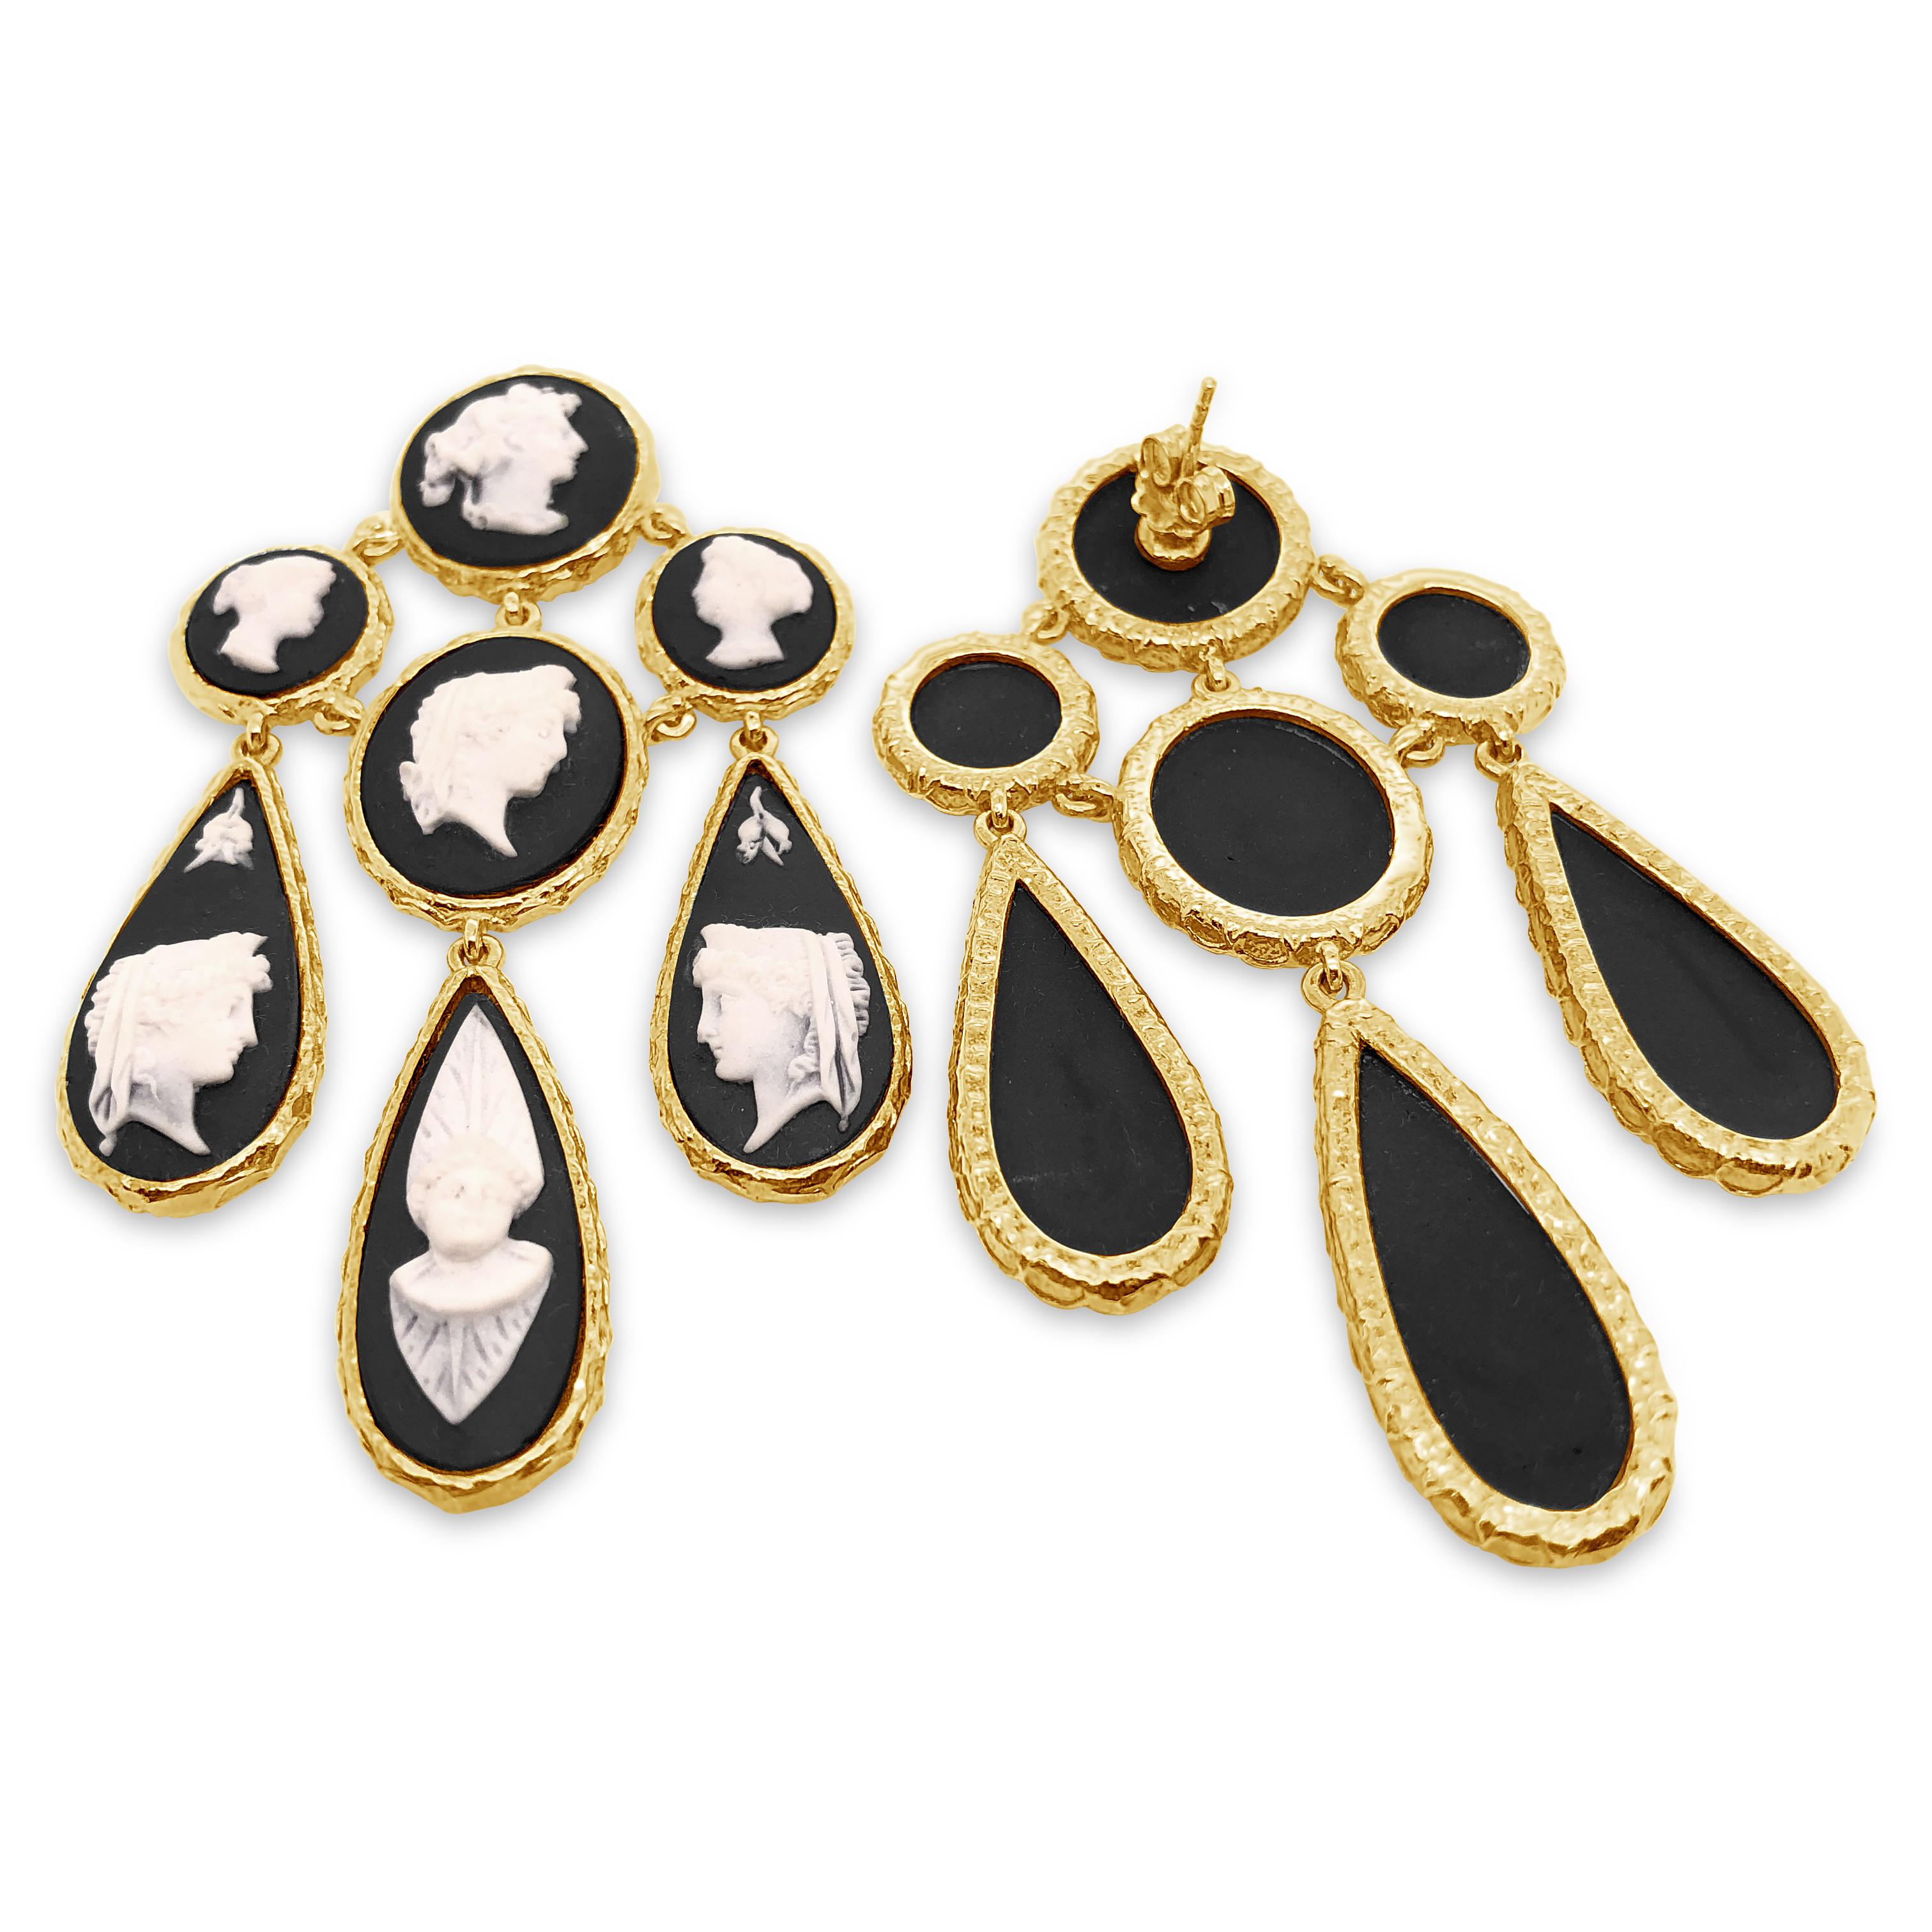 Finely detailed porcelain cameos depicting the profile of classical ancient Rome women. Opulent yet feminine these chandelier earrings can be comfortably worn for any occasion. Beautifully hand crafted, mounted in 18k yellow gold vermeil this design